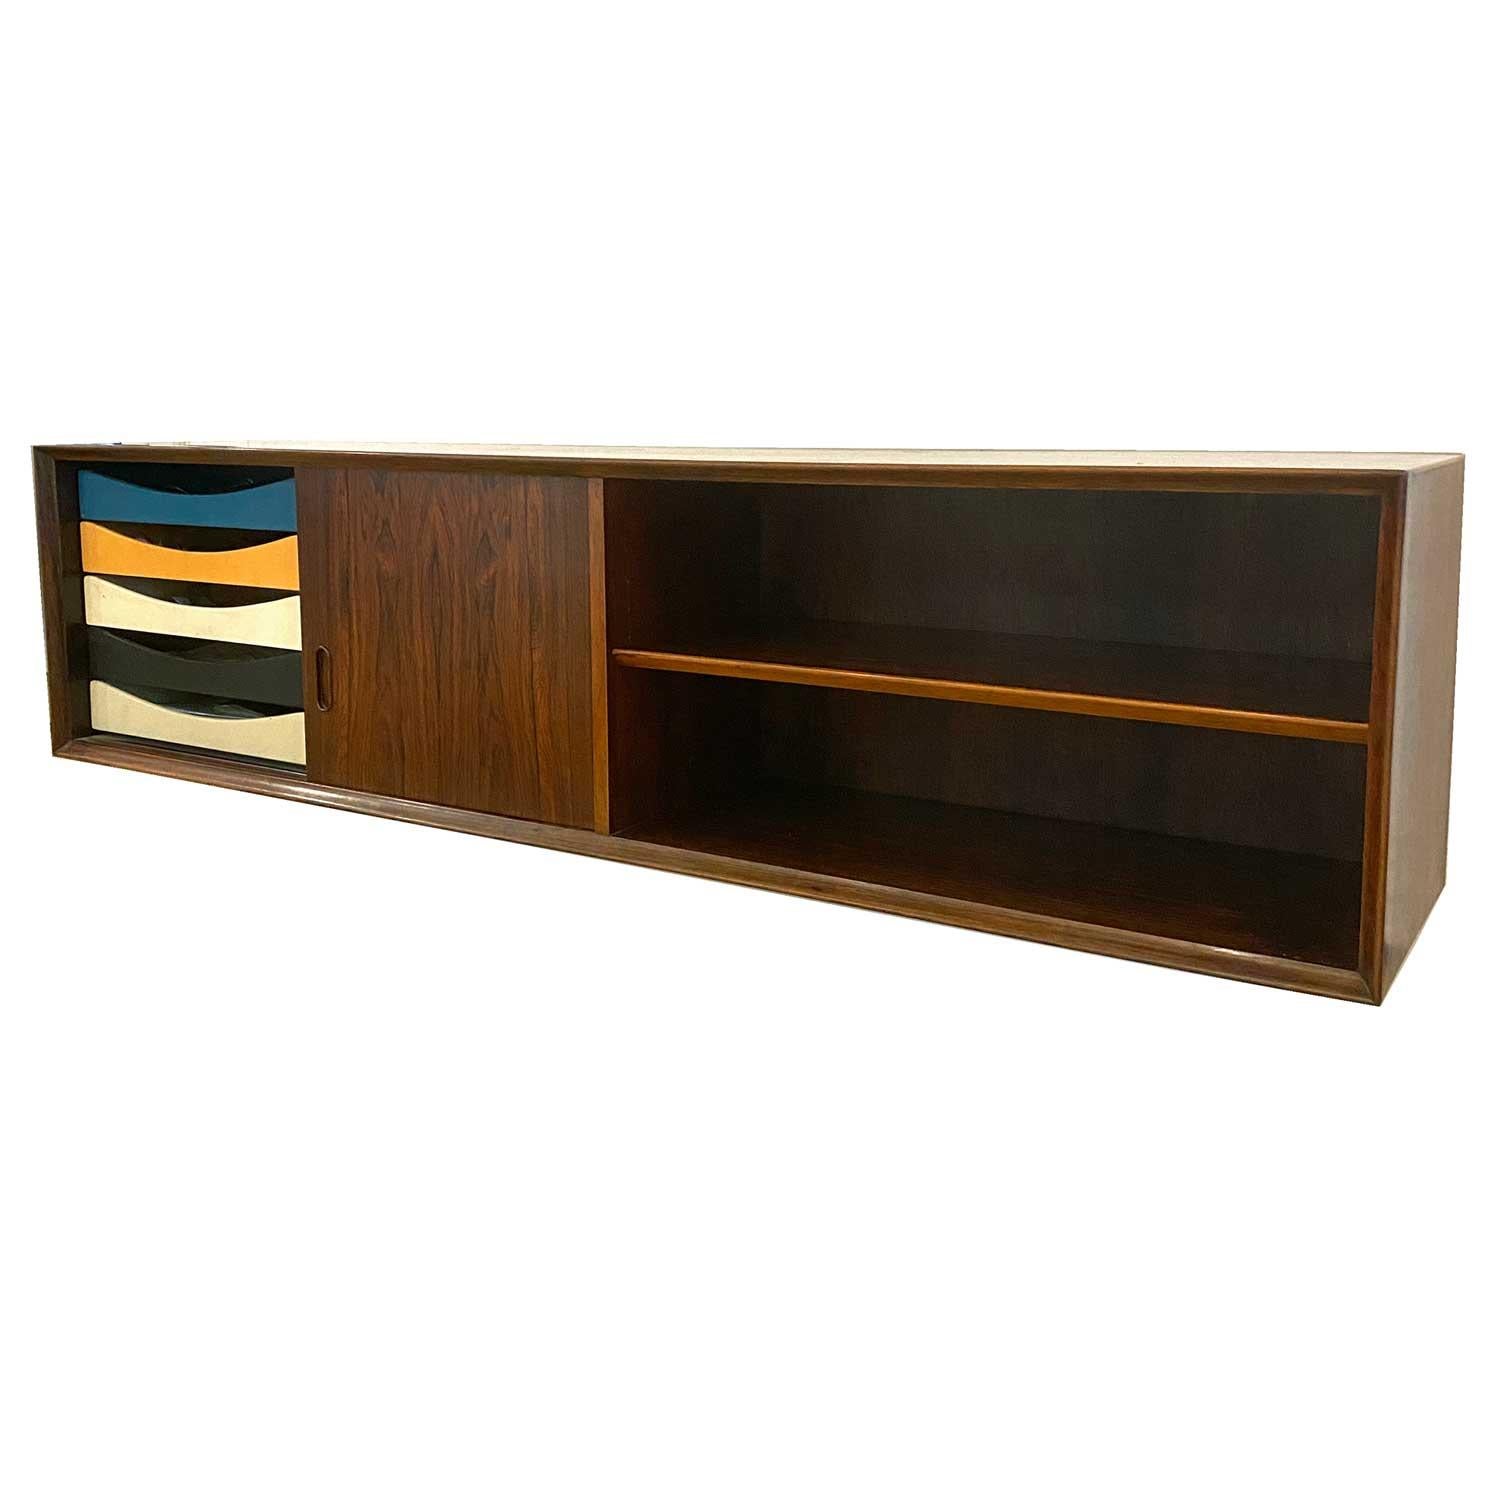 Arne Vodder wall rosewood sideboard
Arne Vodder, wall sideboard in rosewood and lacquered wood for the Danish brand Sibast, circa 1960. Very good state of conservation, the rosewood retains its initial appearance. Possibility of returning the door: